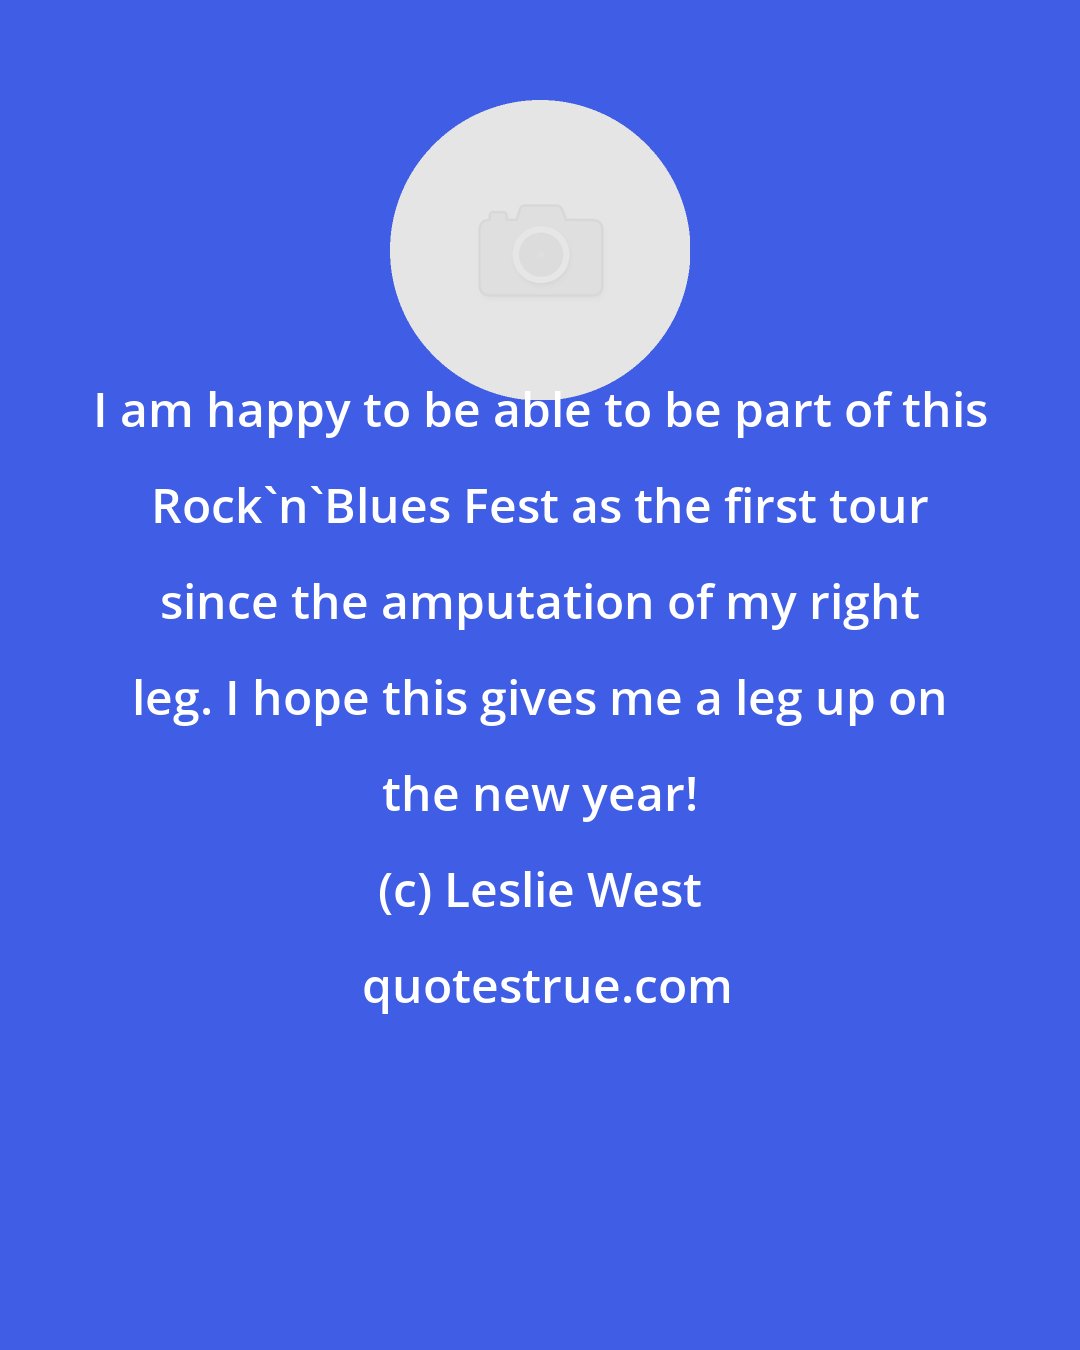 Leslie West: I am happy to be able to be part of this Rock'n'Blues Fest as the first tour since the amputation of my right leg. I hope this gives me a leg up on the new year!